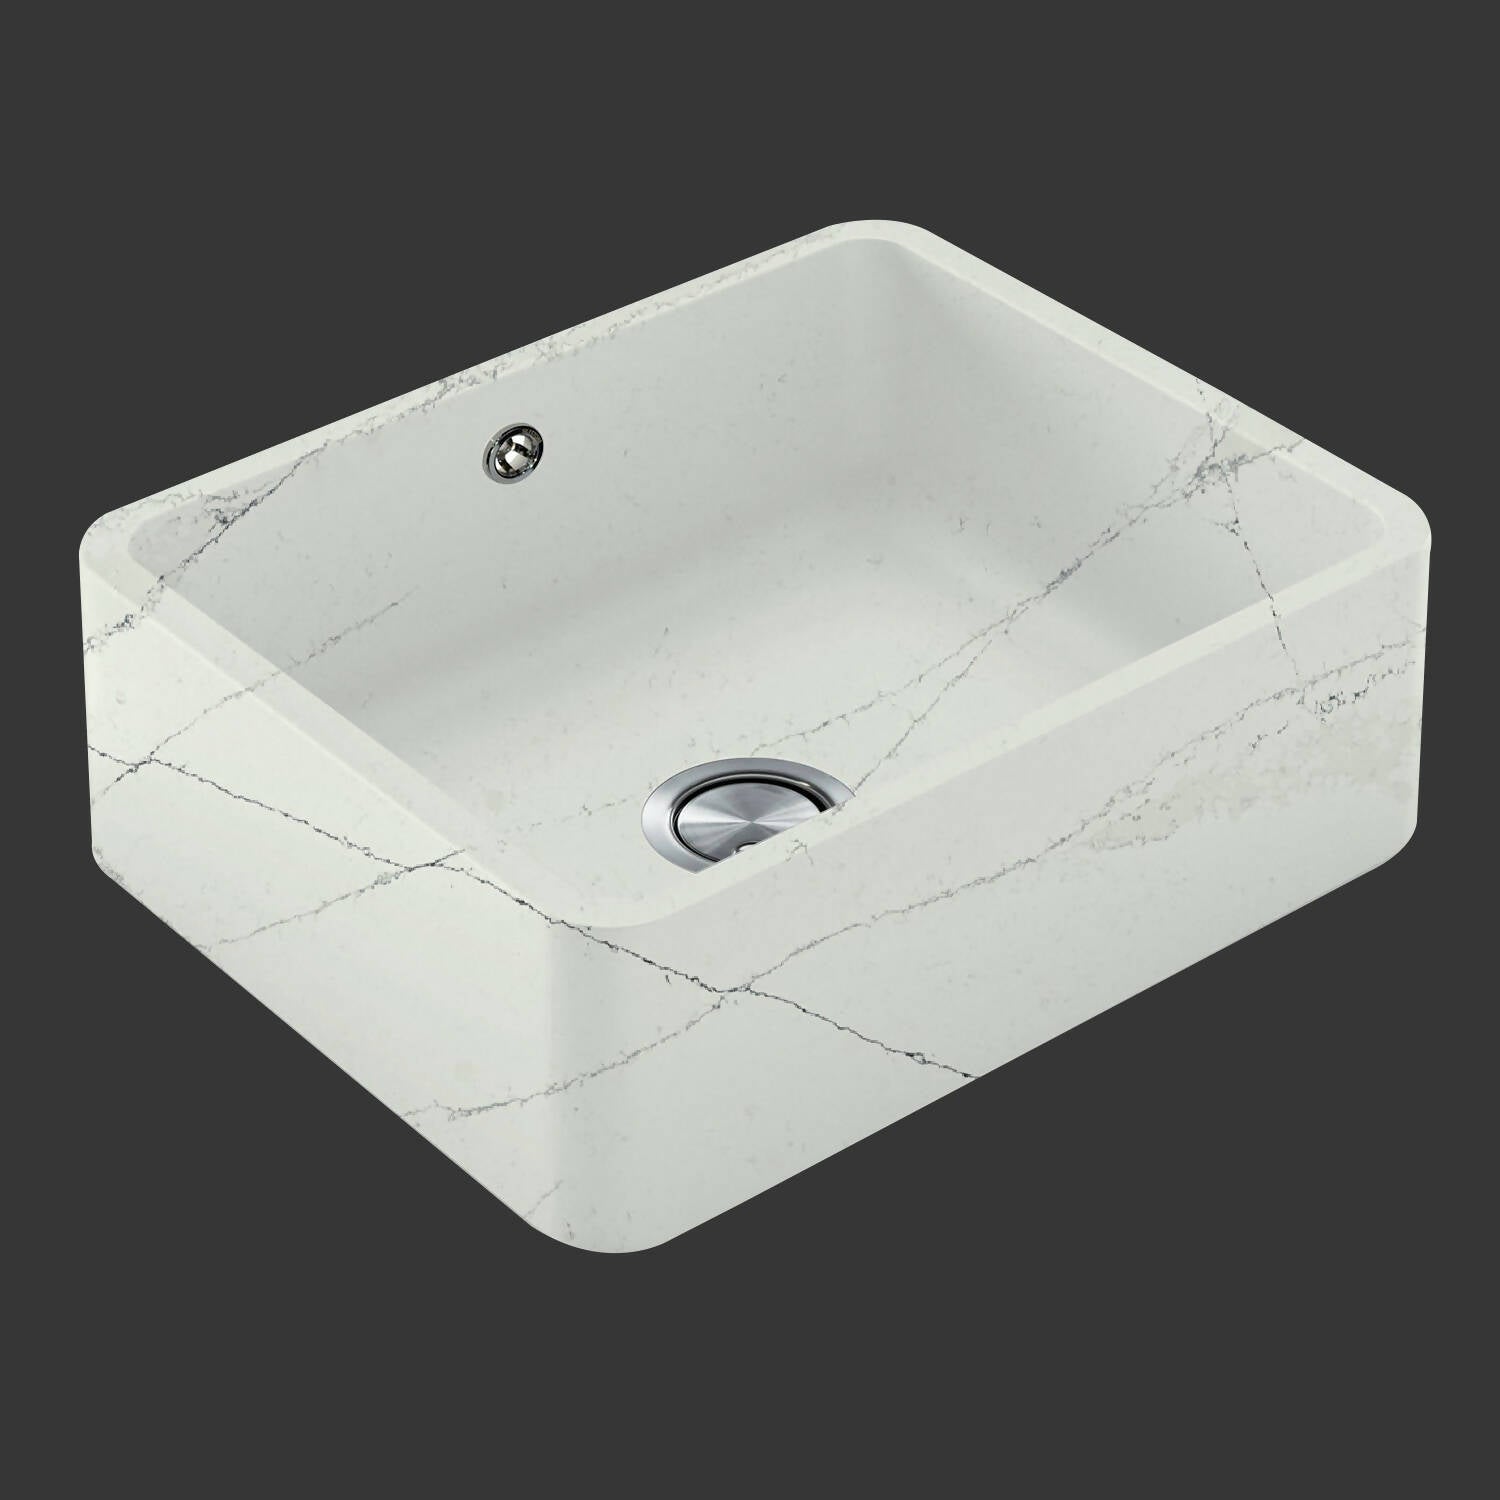 ETHEREAL NOCTIS INTEGRITY SINK,Stone Sink,Cosentino Sink,www.work-tops.com